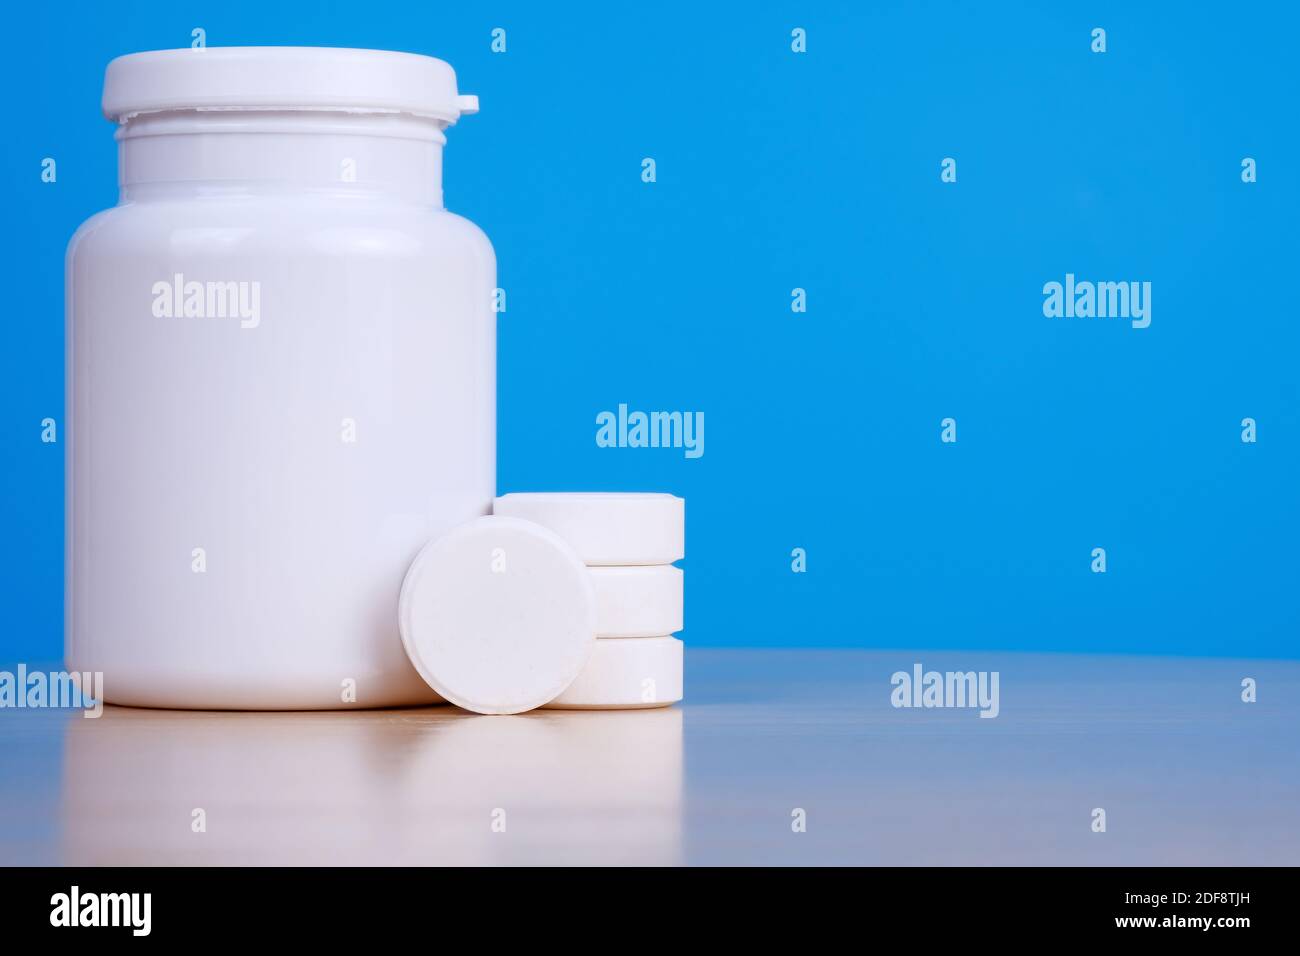 Big white tablets and medicine bottle on blue background.  Stock Photo